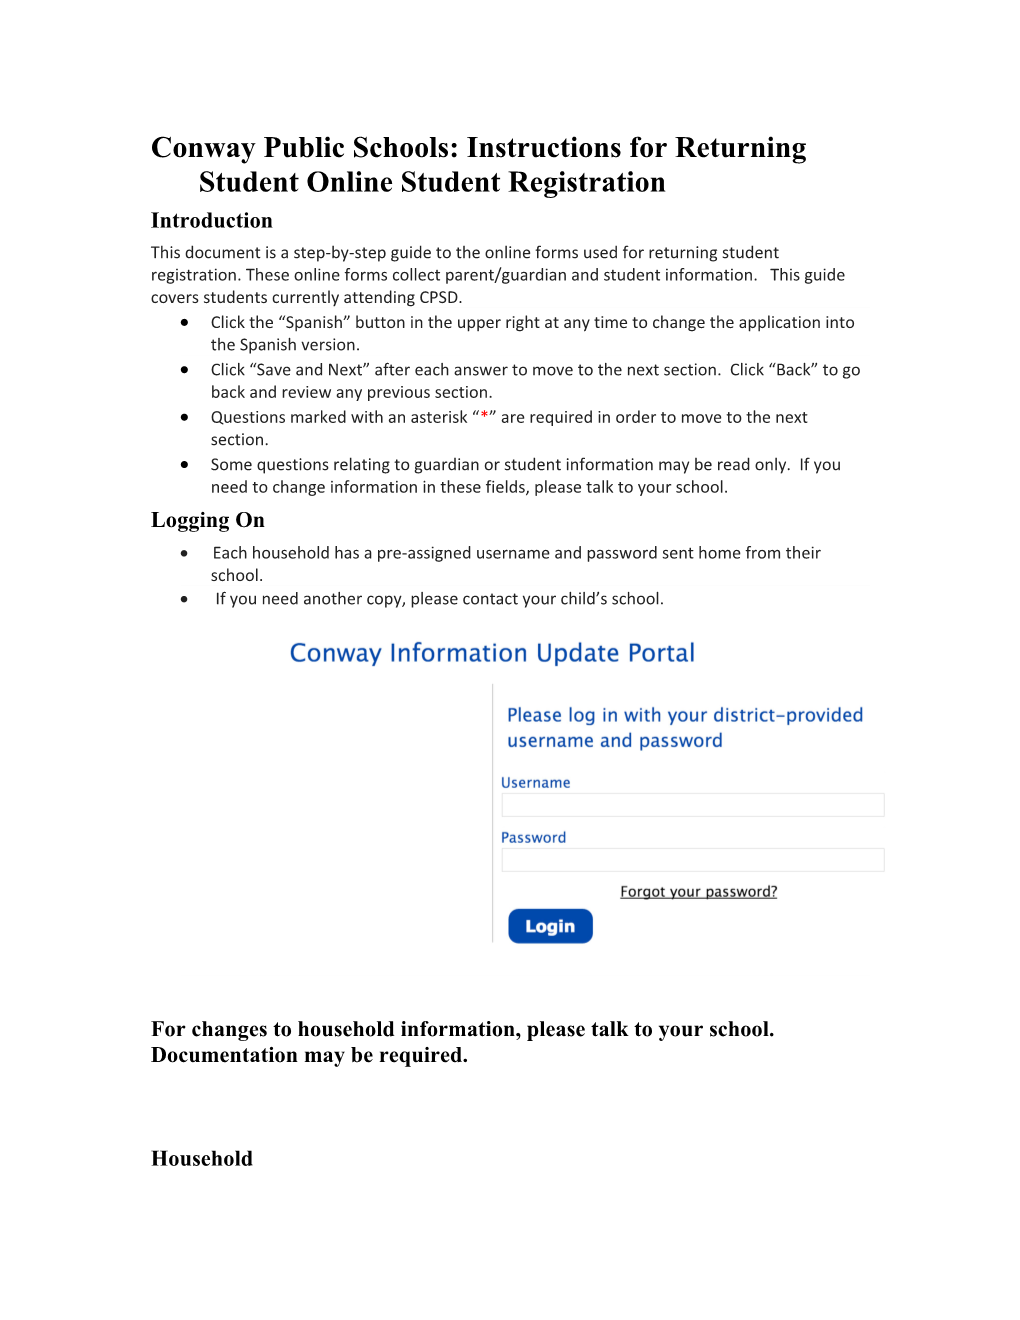 Conway Public Schools: Instructions for Returning Student Online Student Registration